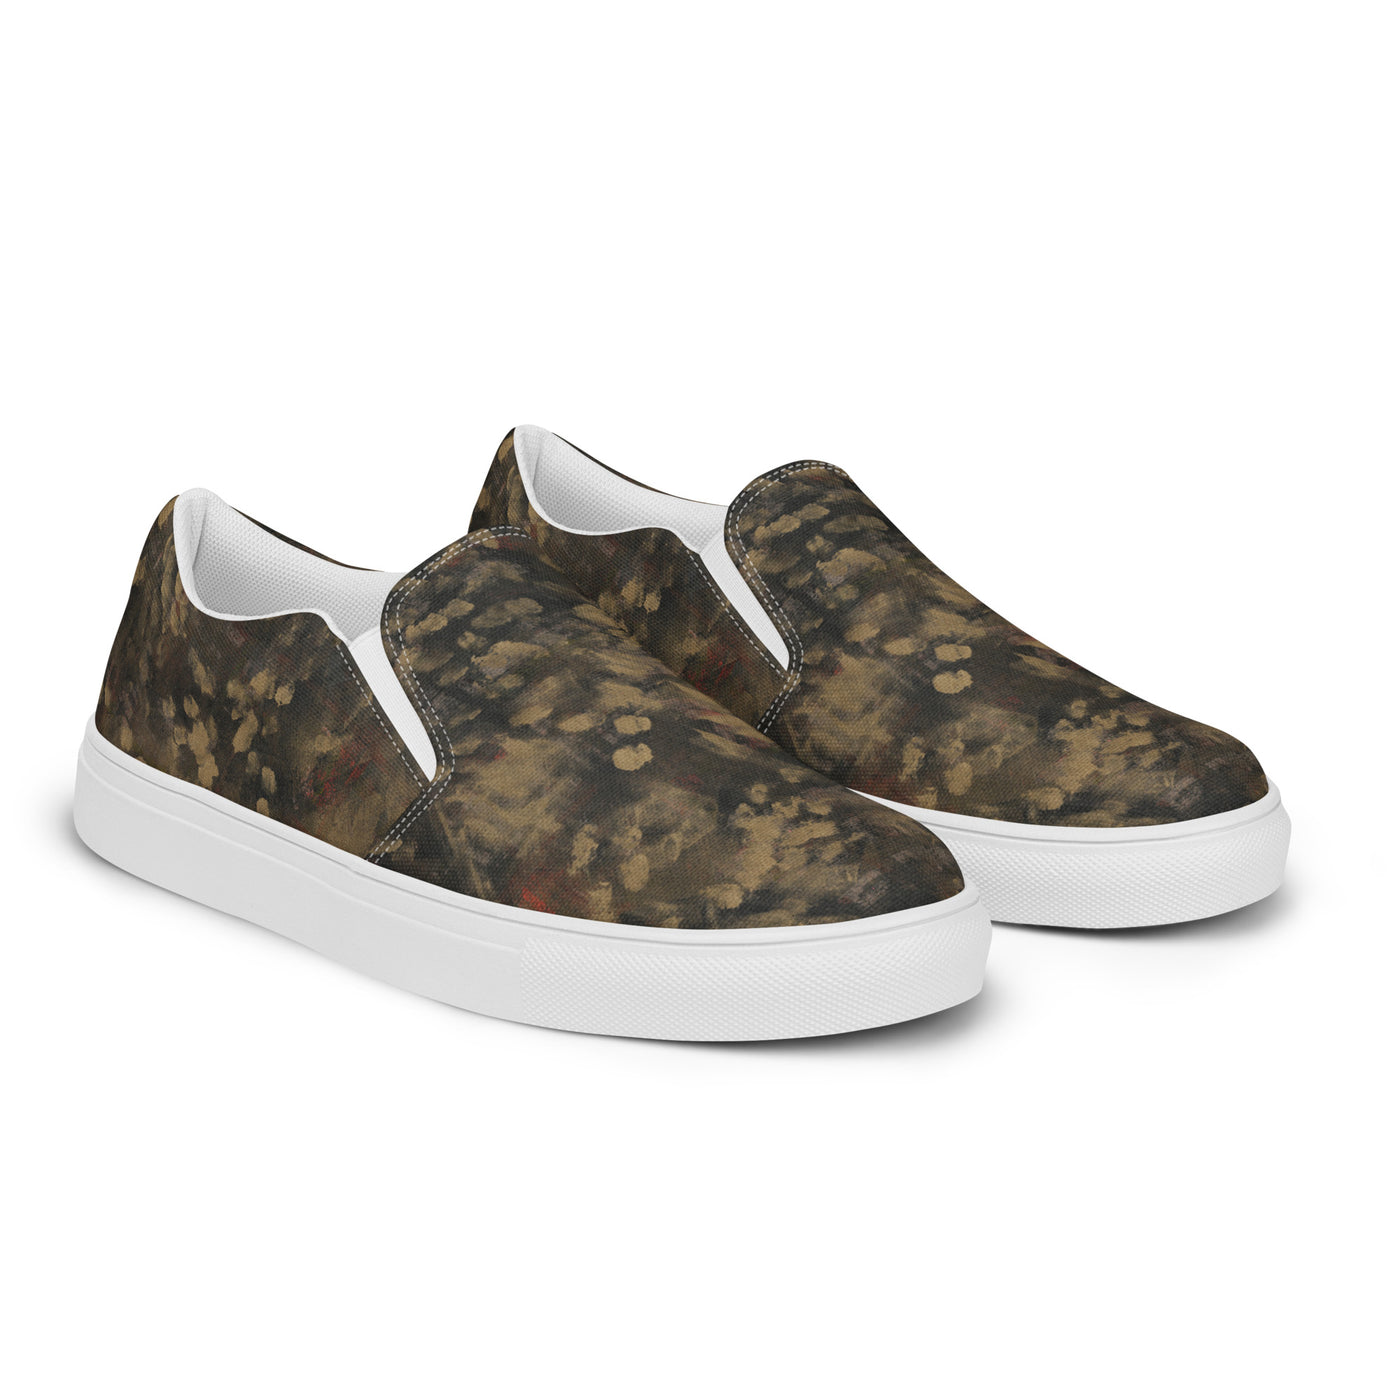 Courage Art Women’s slip-on canvas shoes